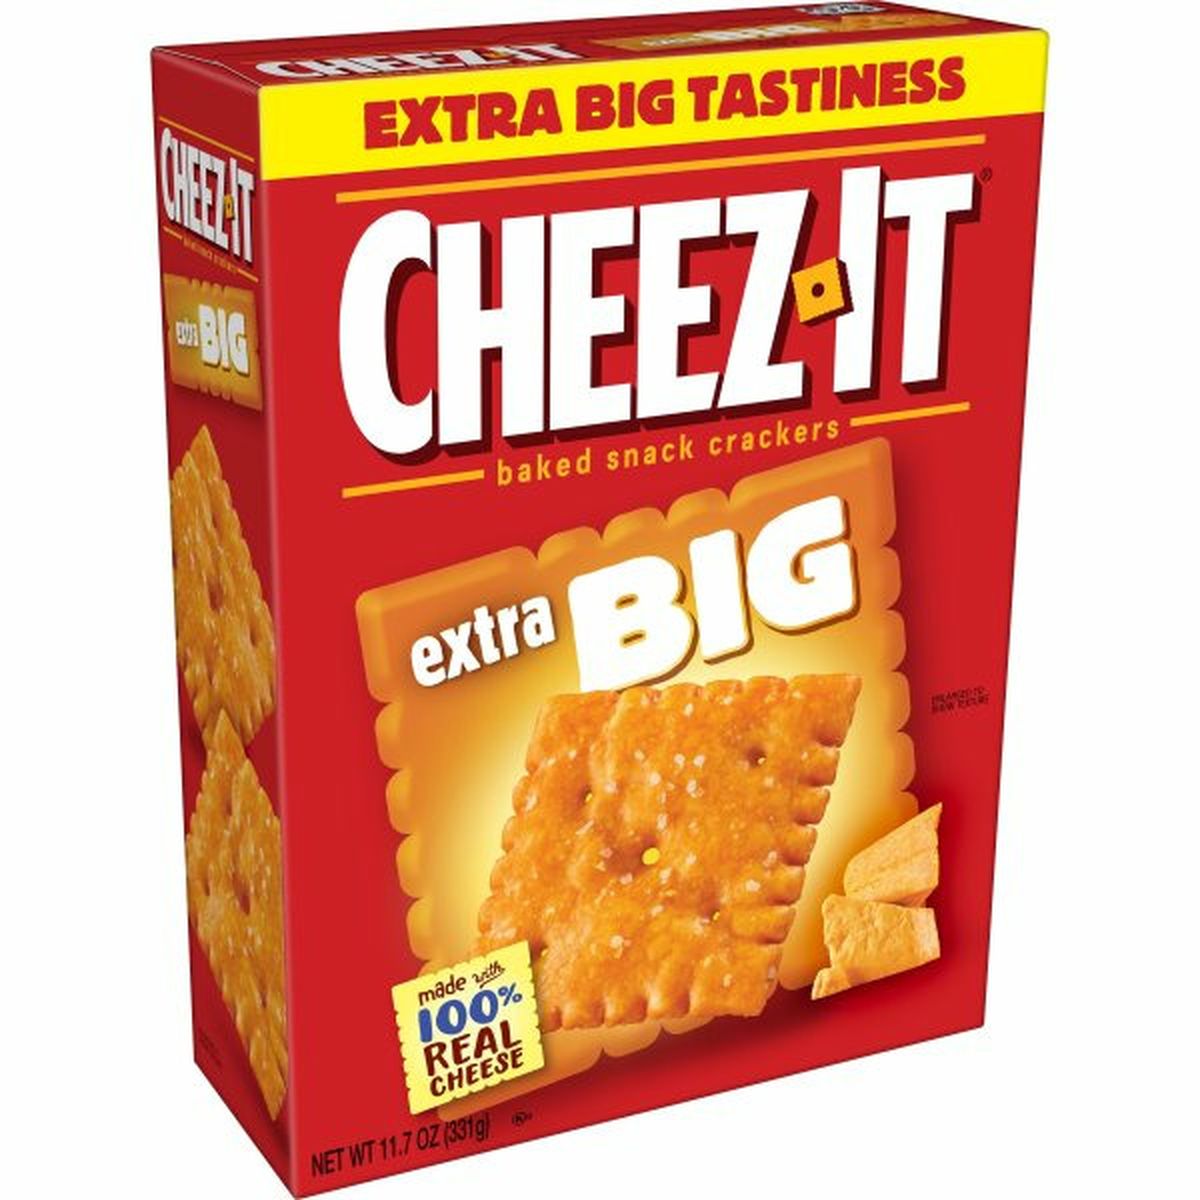 Calories in Cheez-It Crackers Cheez-It Baked Snack Cheese Crackers, Extra Big, Big Original Cheez-It, 11.7oz